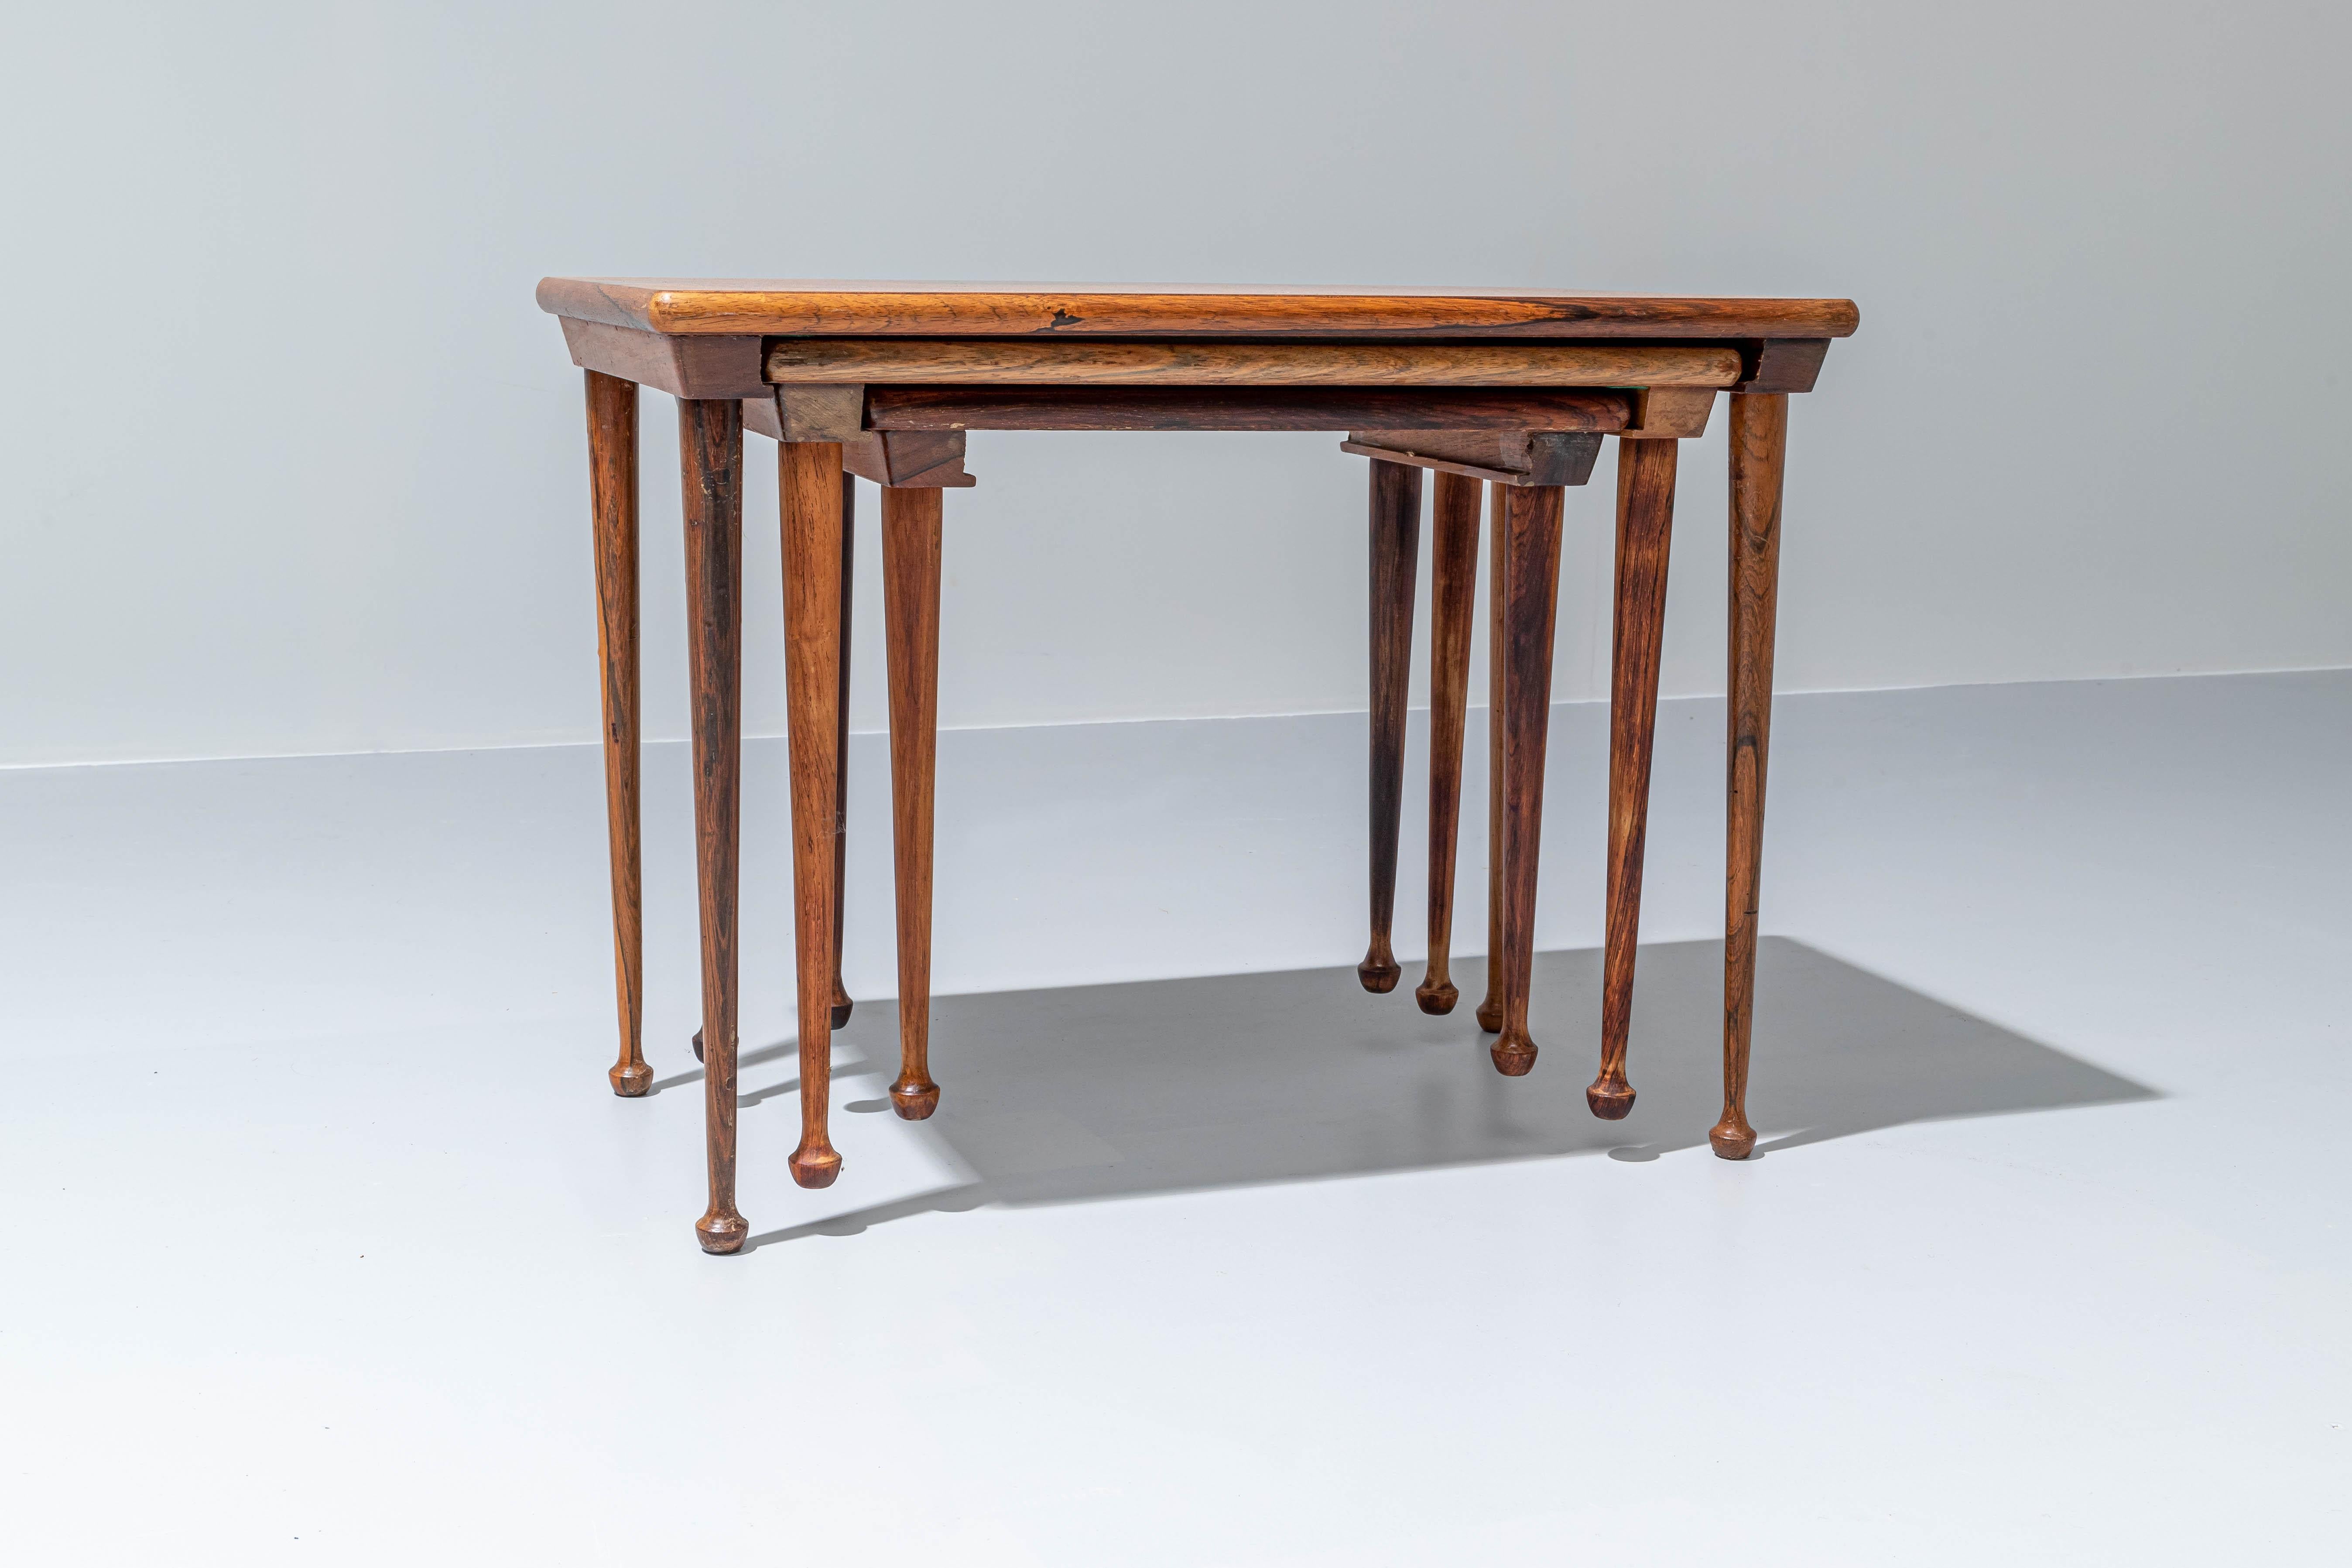 Set of 3 practical and beautiful nesting tables in rosewood. What stands out are the elegant legs with interesting flames in the rosewood and stubby feet. Rosewood is a very strong high-quality hardwood that serves very well for wood-turning and